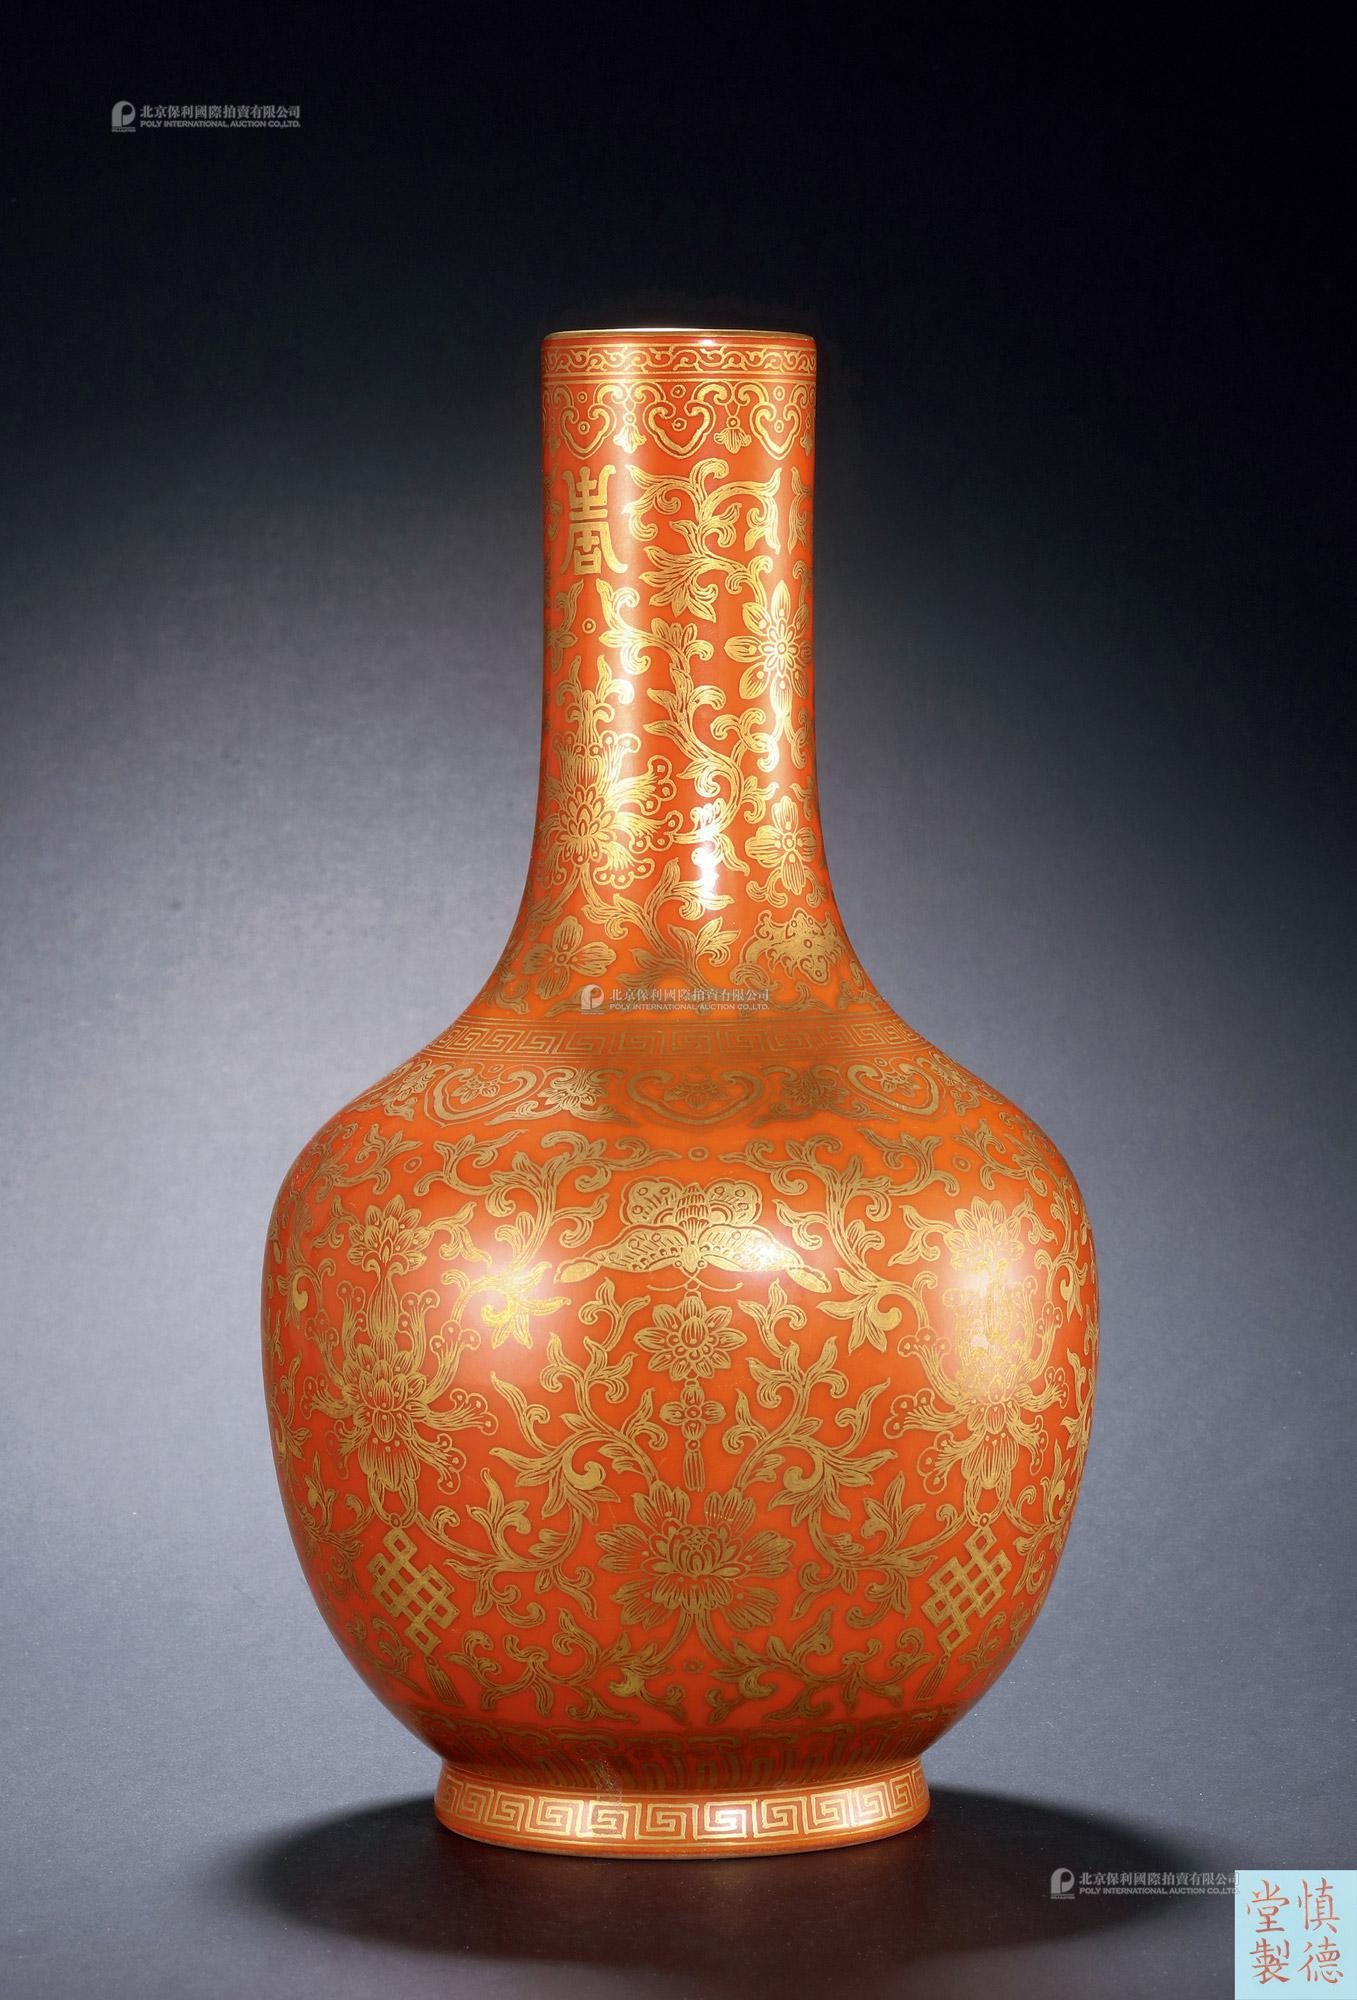 A CORAL-RED GLAZE VASE WITH BUTTERFLY DESIGN IN GOLD TRACERY